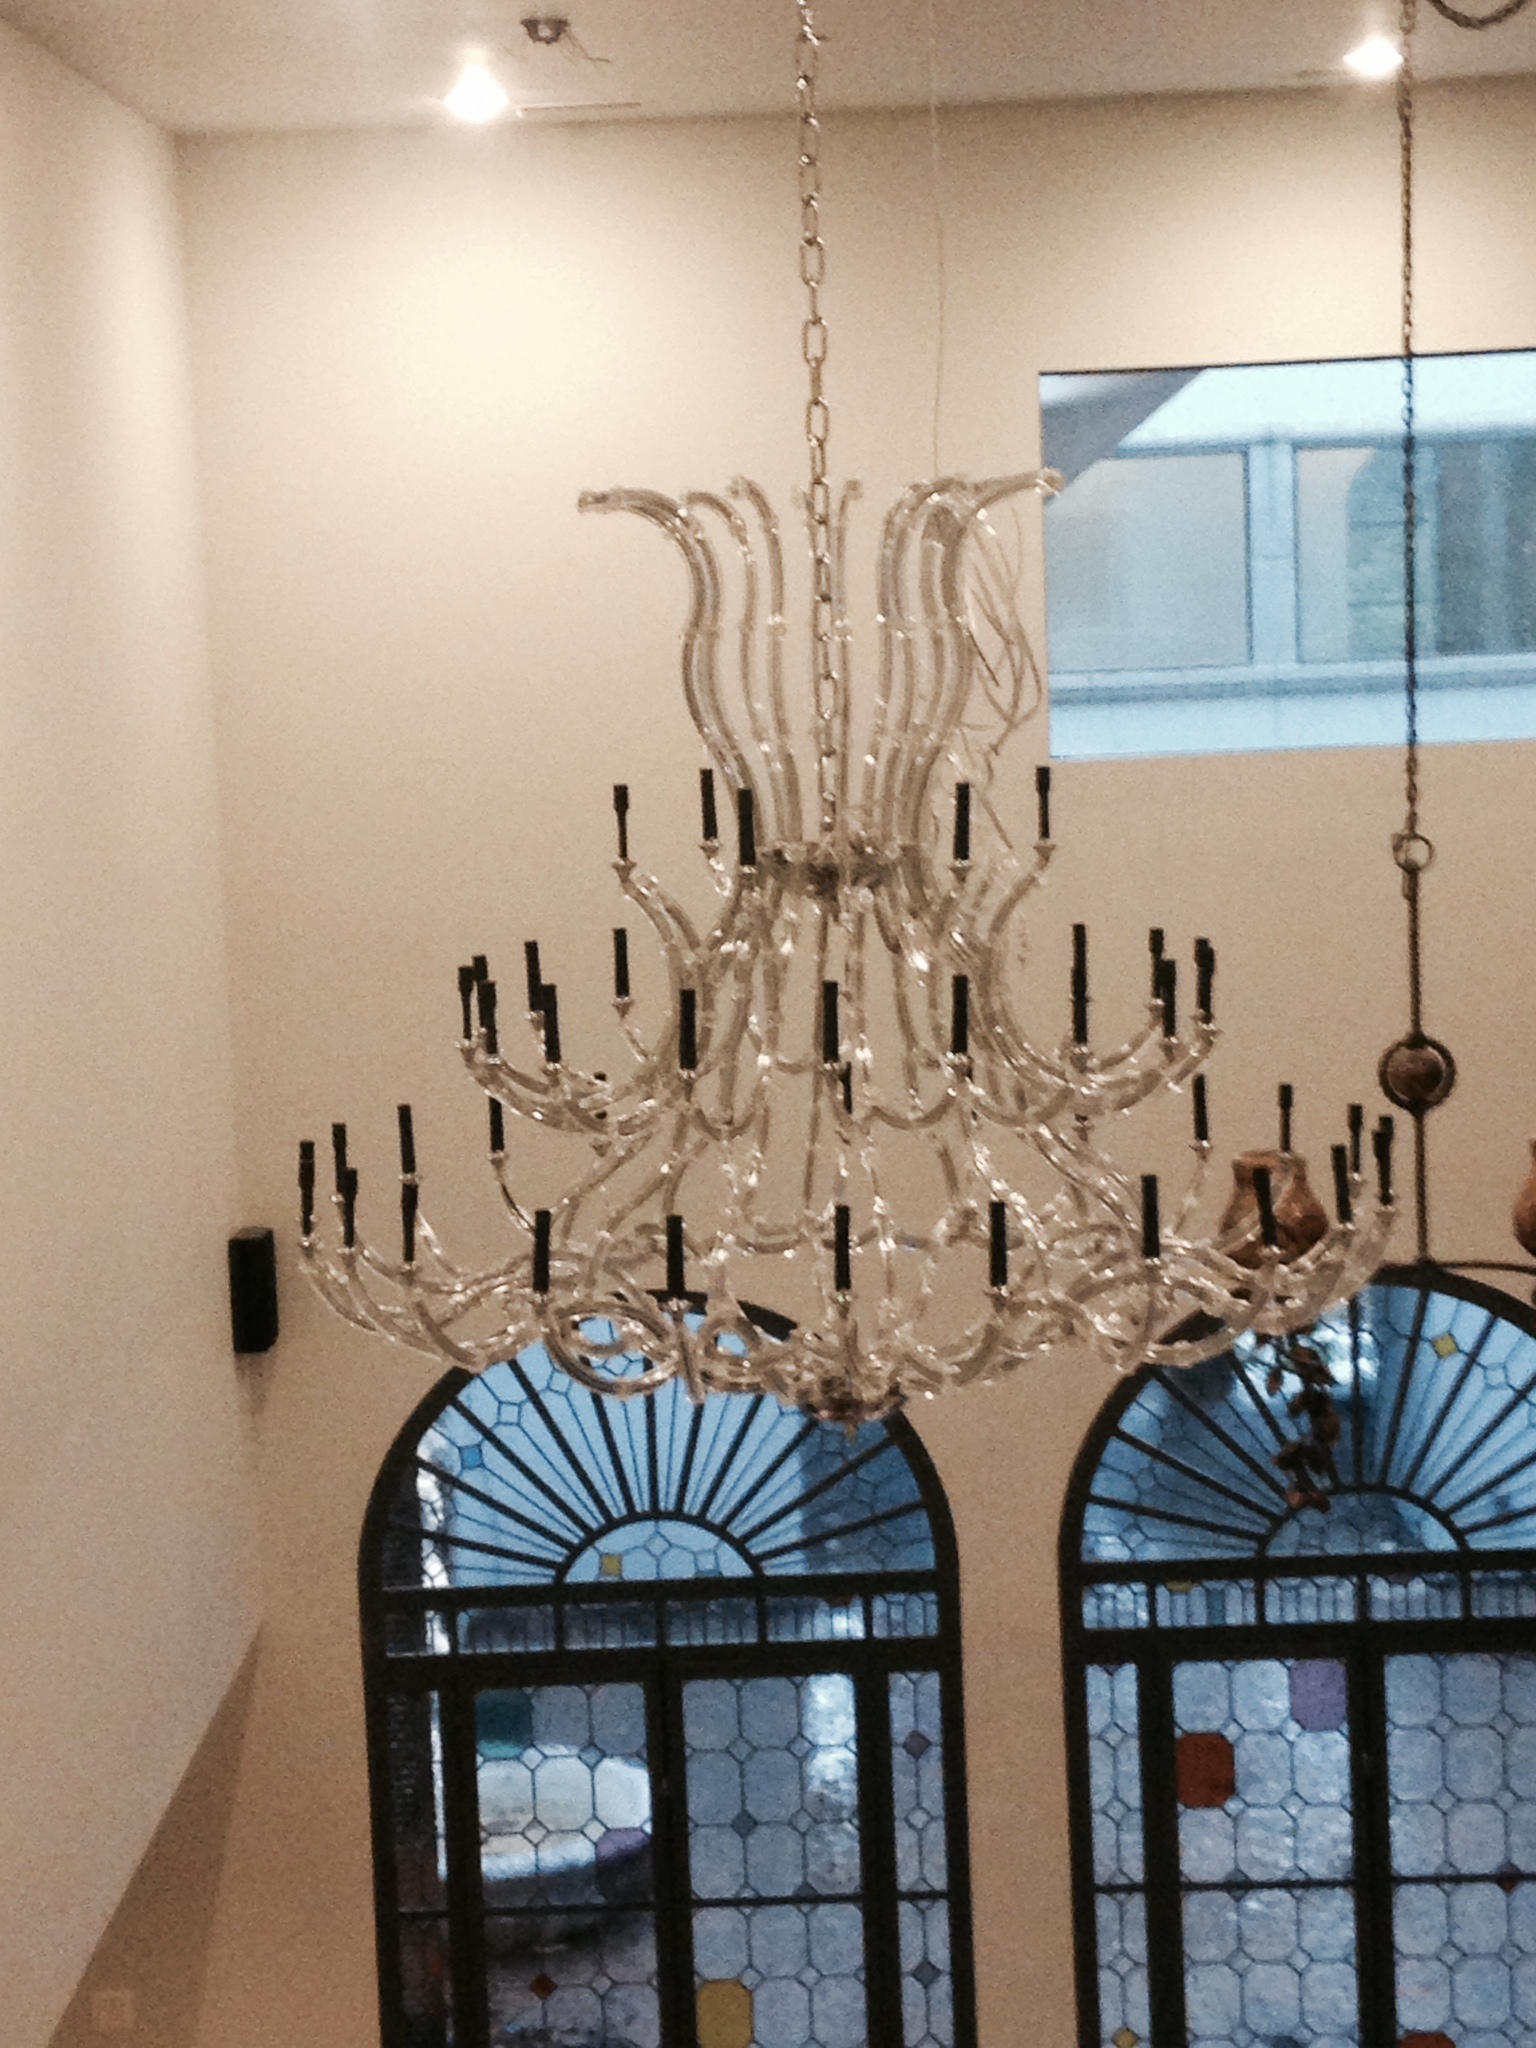 Finished Chandelier Installation job by TLC Electrical